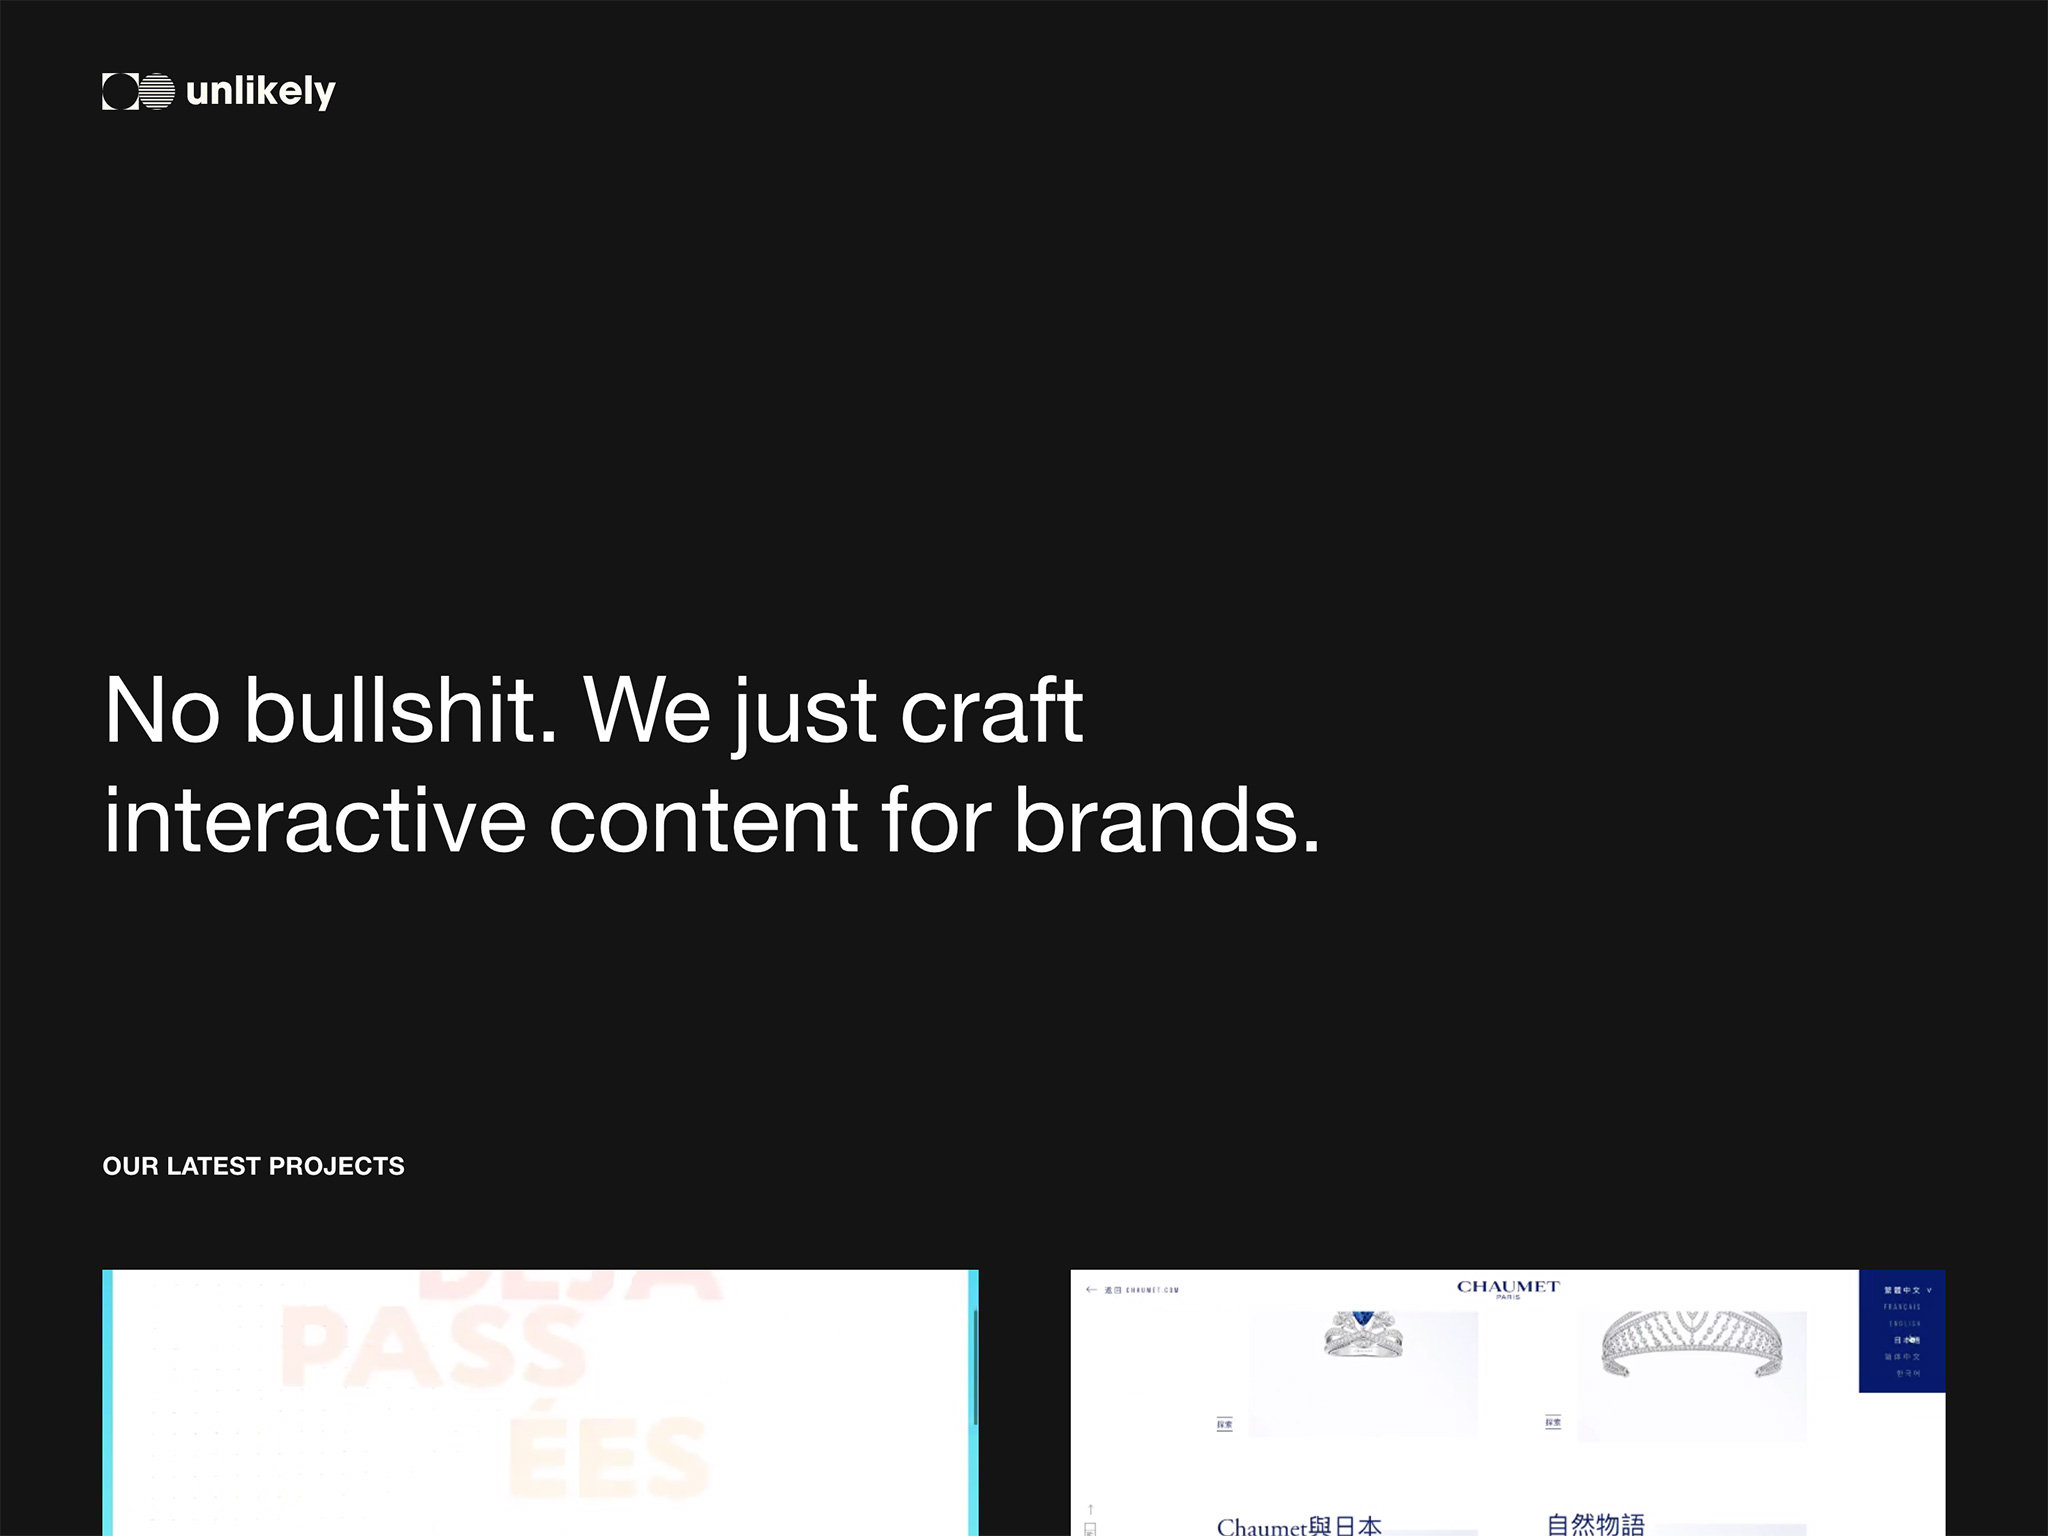 Unlikely – No bullshit. We just craft interactive and audiovisual content for brands.